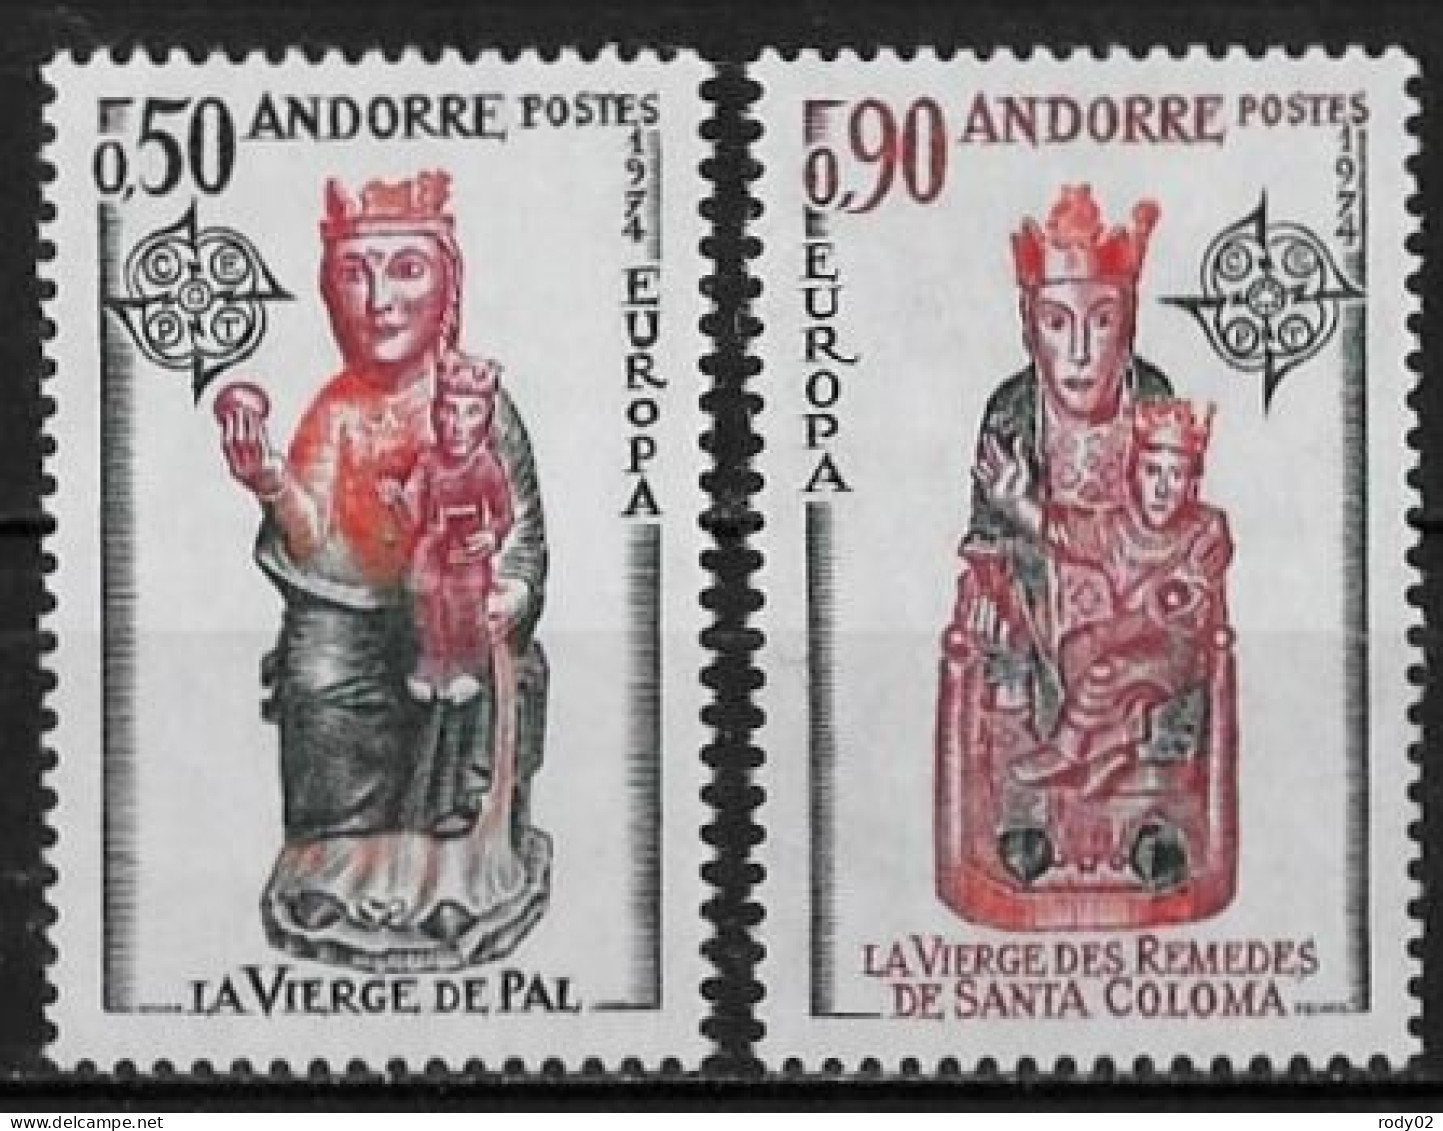 ANDORRE - EUROPA CEPT - N° 237 ET 238 - NEUF** MNH - 1974